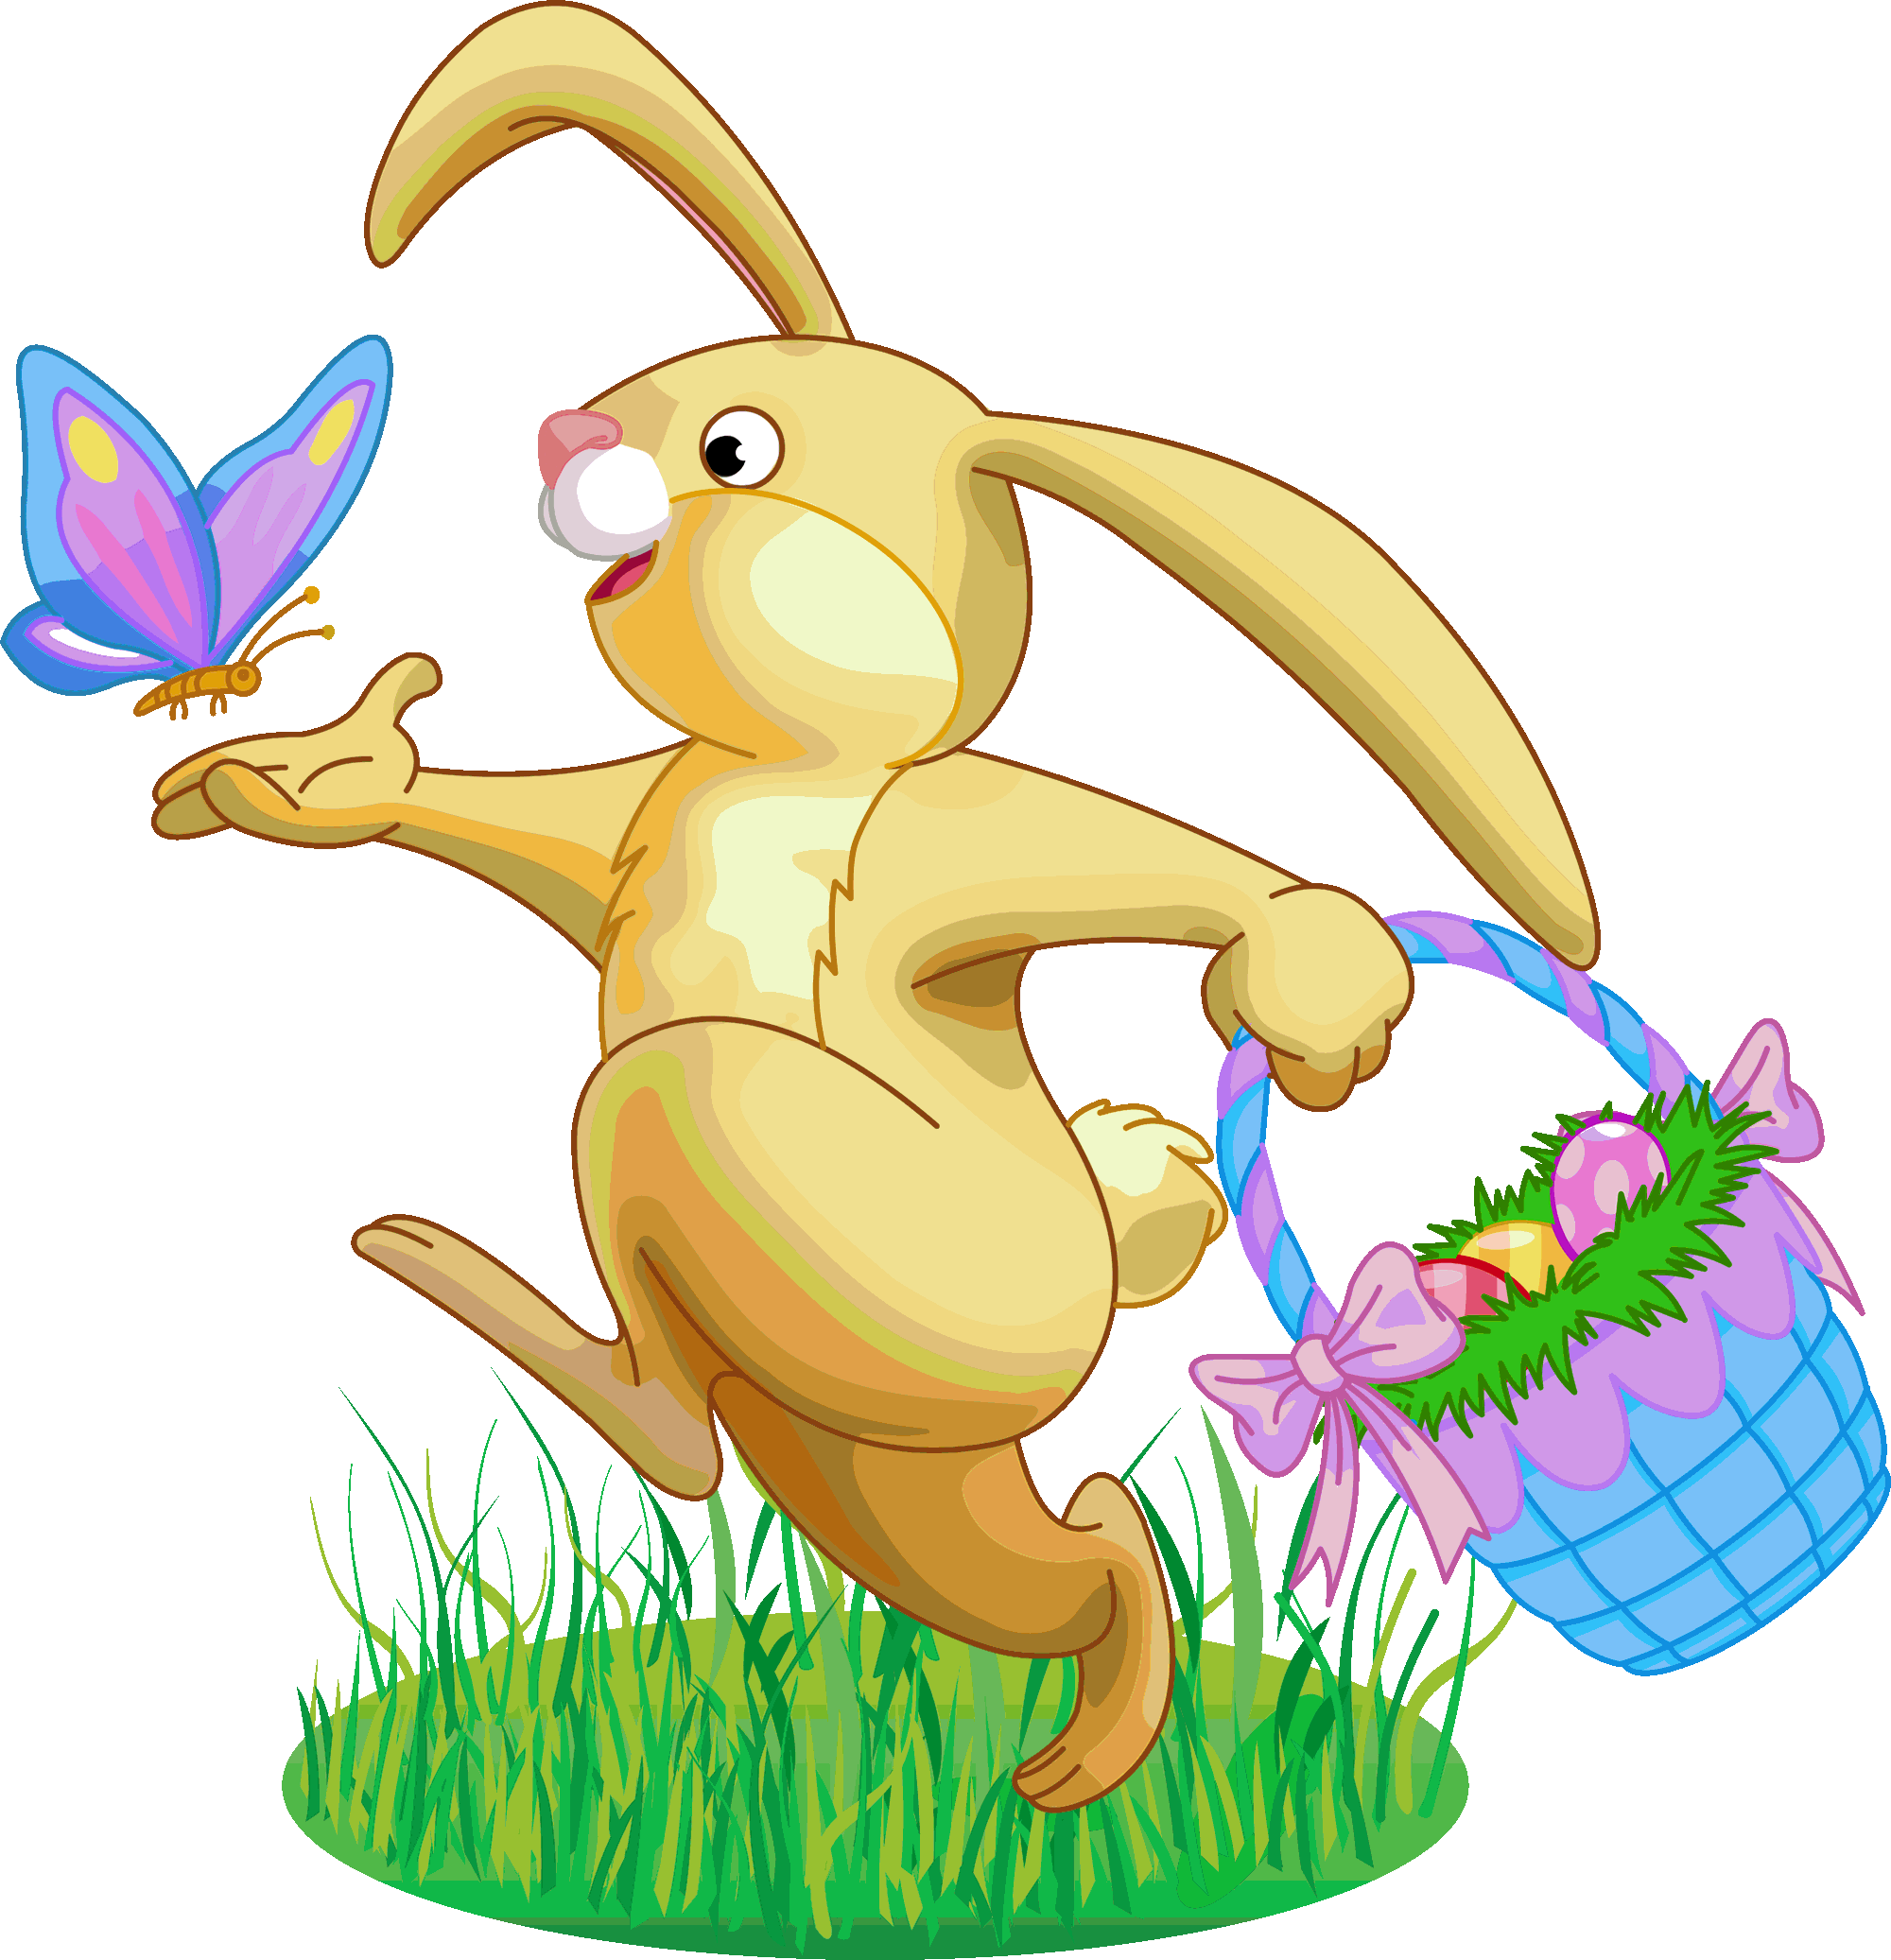 2017 clipart easter. Sussex top attractions st